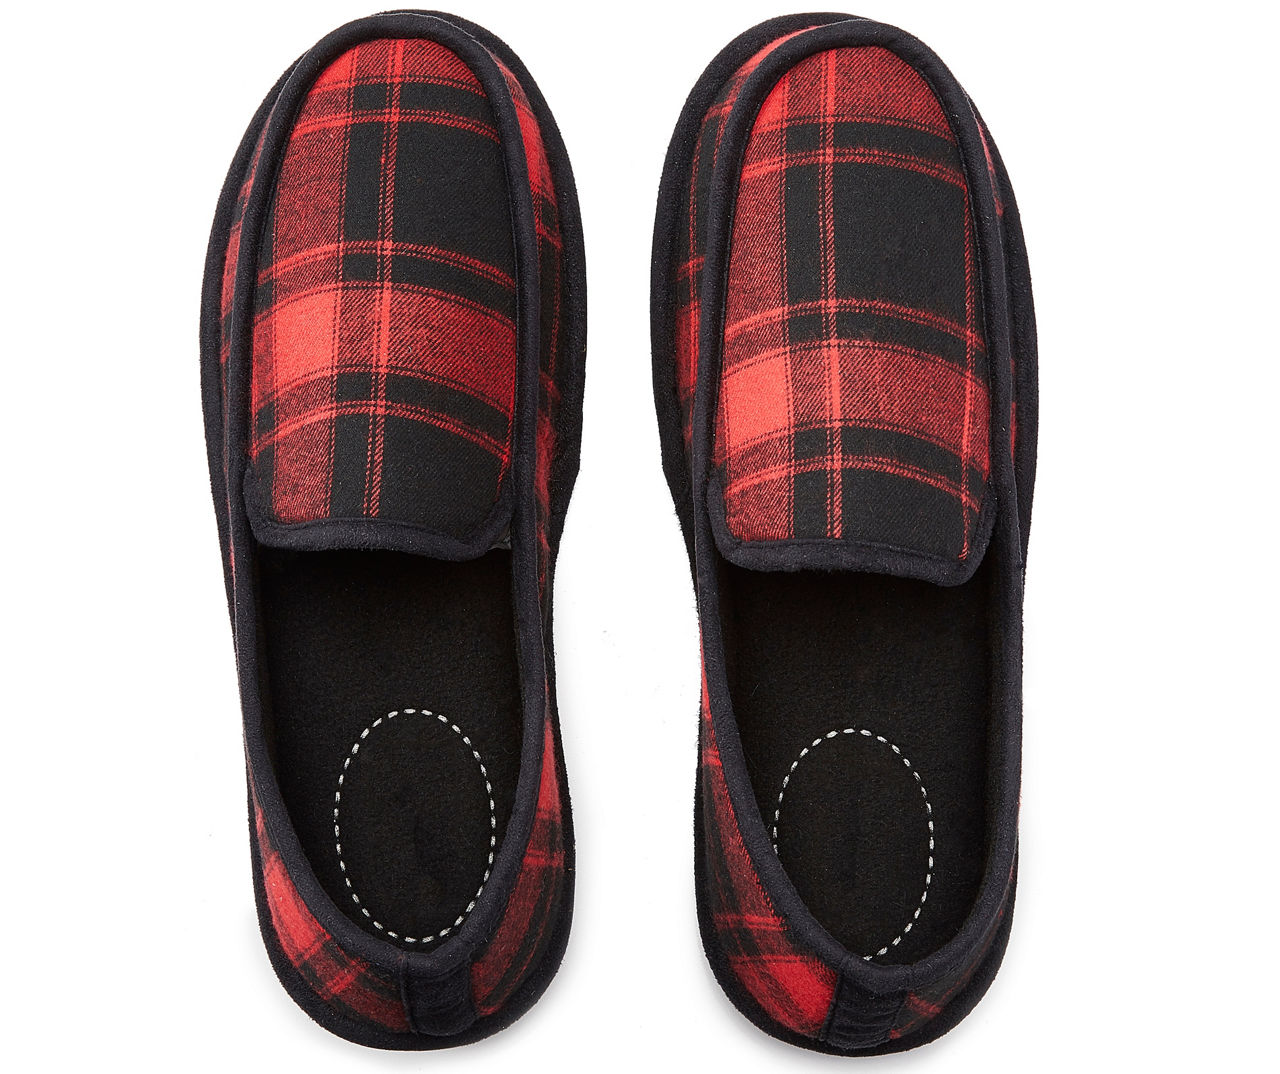 Men's Black & Red Plaid Moccasin Slippers, Size XL